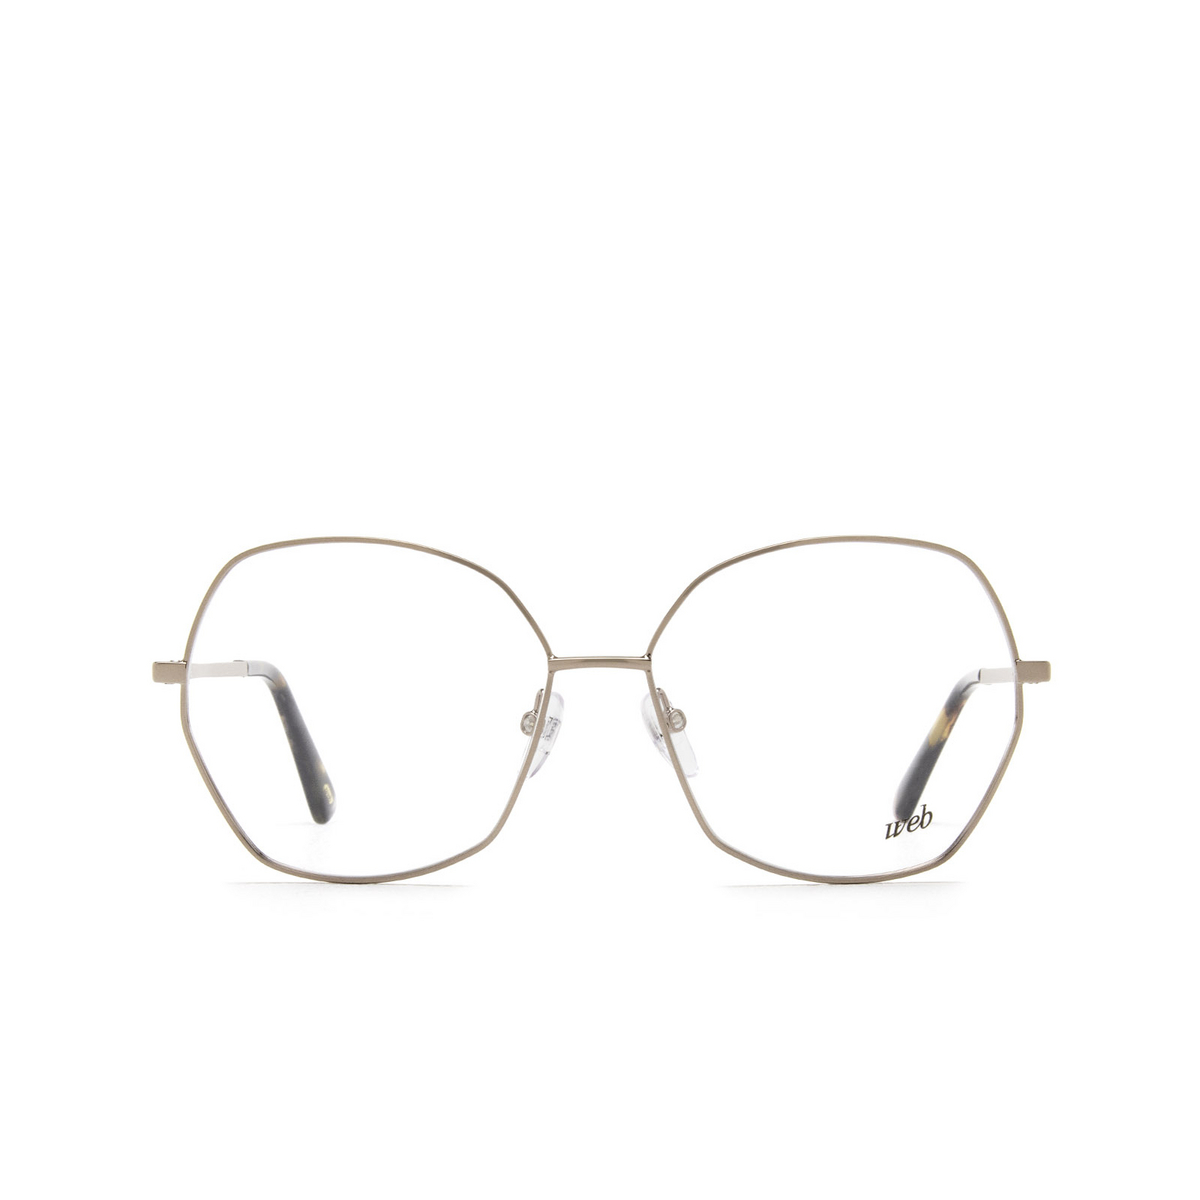 Web® Butterfly Eyeglasses: WE5366 color 038 Bronze - front view